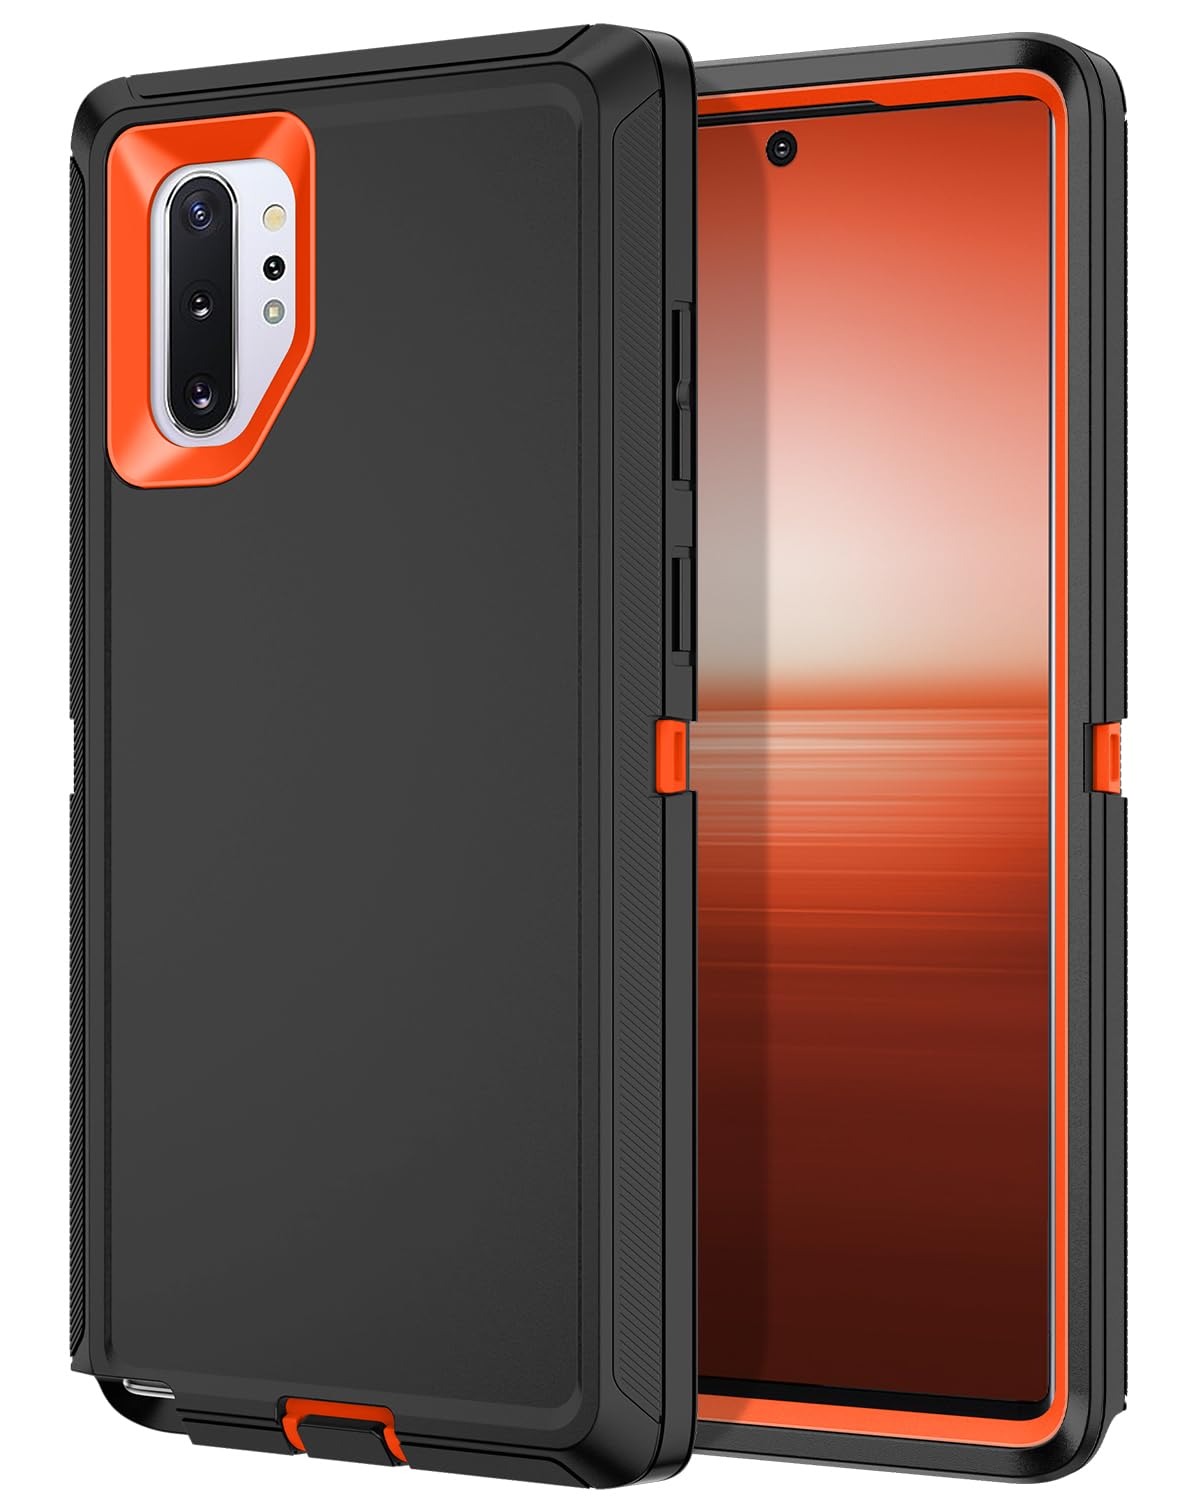 I-HONVA for Galaxy Note 10 Plus Case Shockproof Dust/Drop Proof 3-Layer Full Body Protection [Without Screen Protector] Heavy Duty Durable Cover Case for Samsung Galaxy Note 10 Plus,Black/Orange